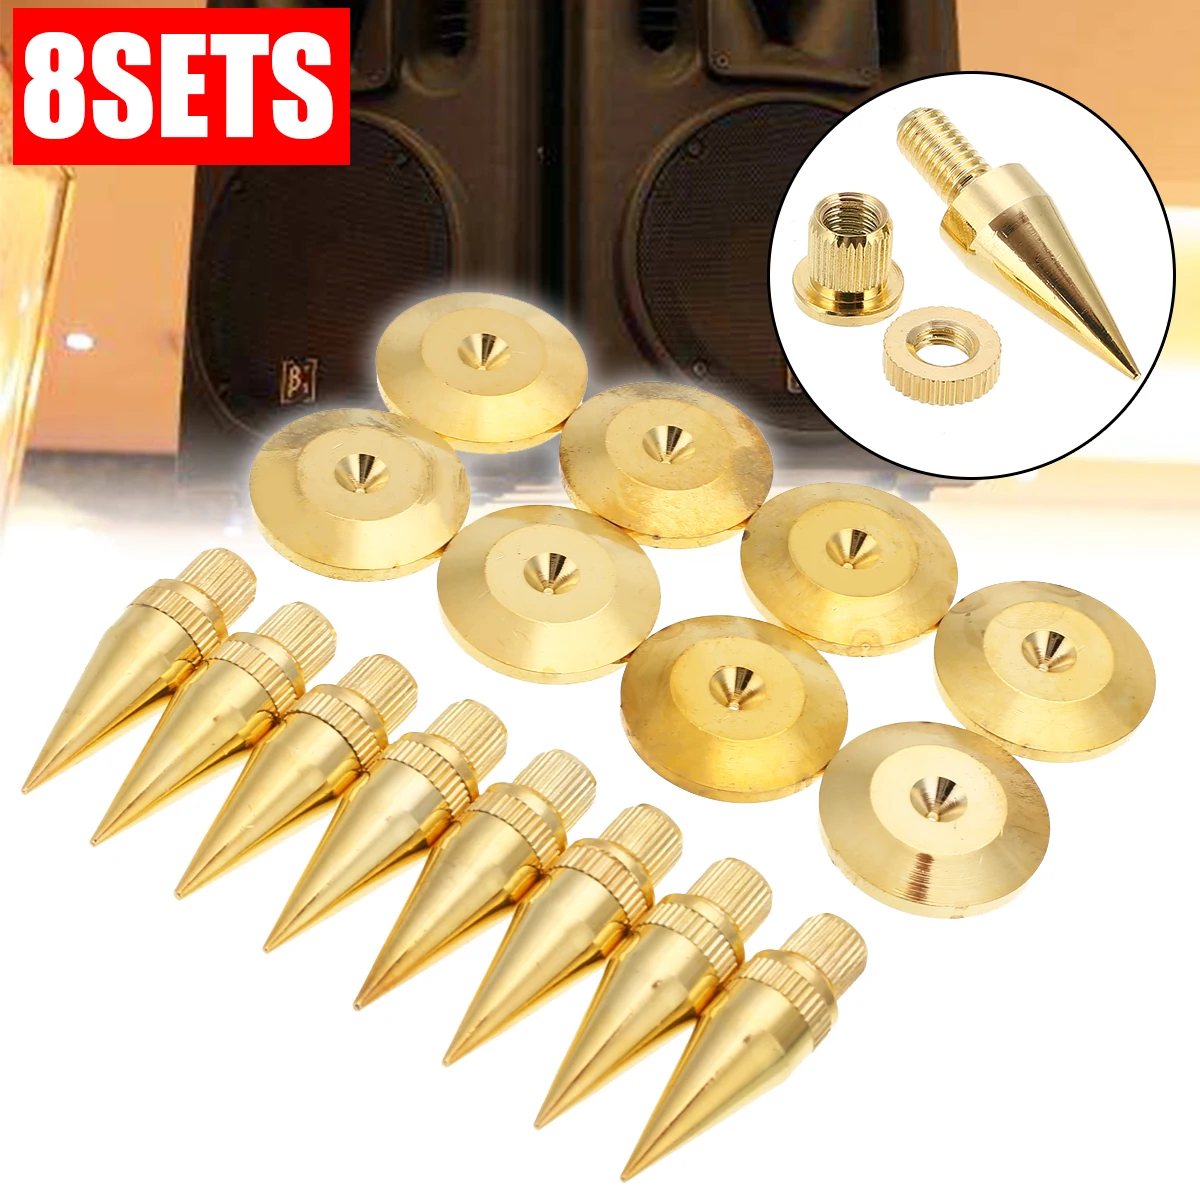 

8sets M6*36 Golden Speaker Isolation Spike High Quality Copper Isolation Cone Stand Feet+Base Pads Floor Discs Mayitr